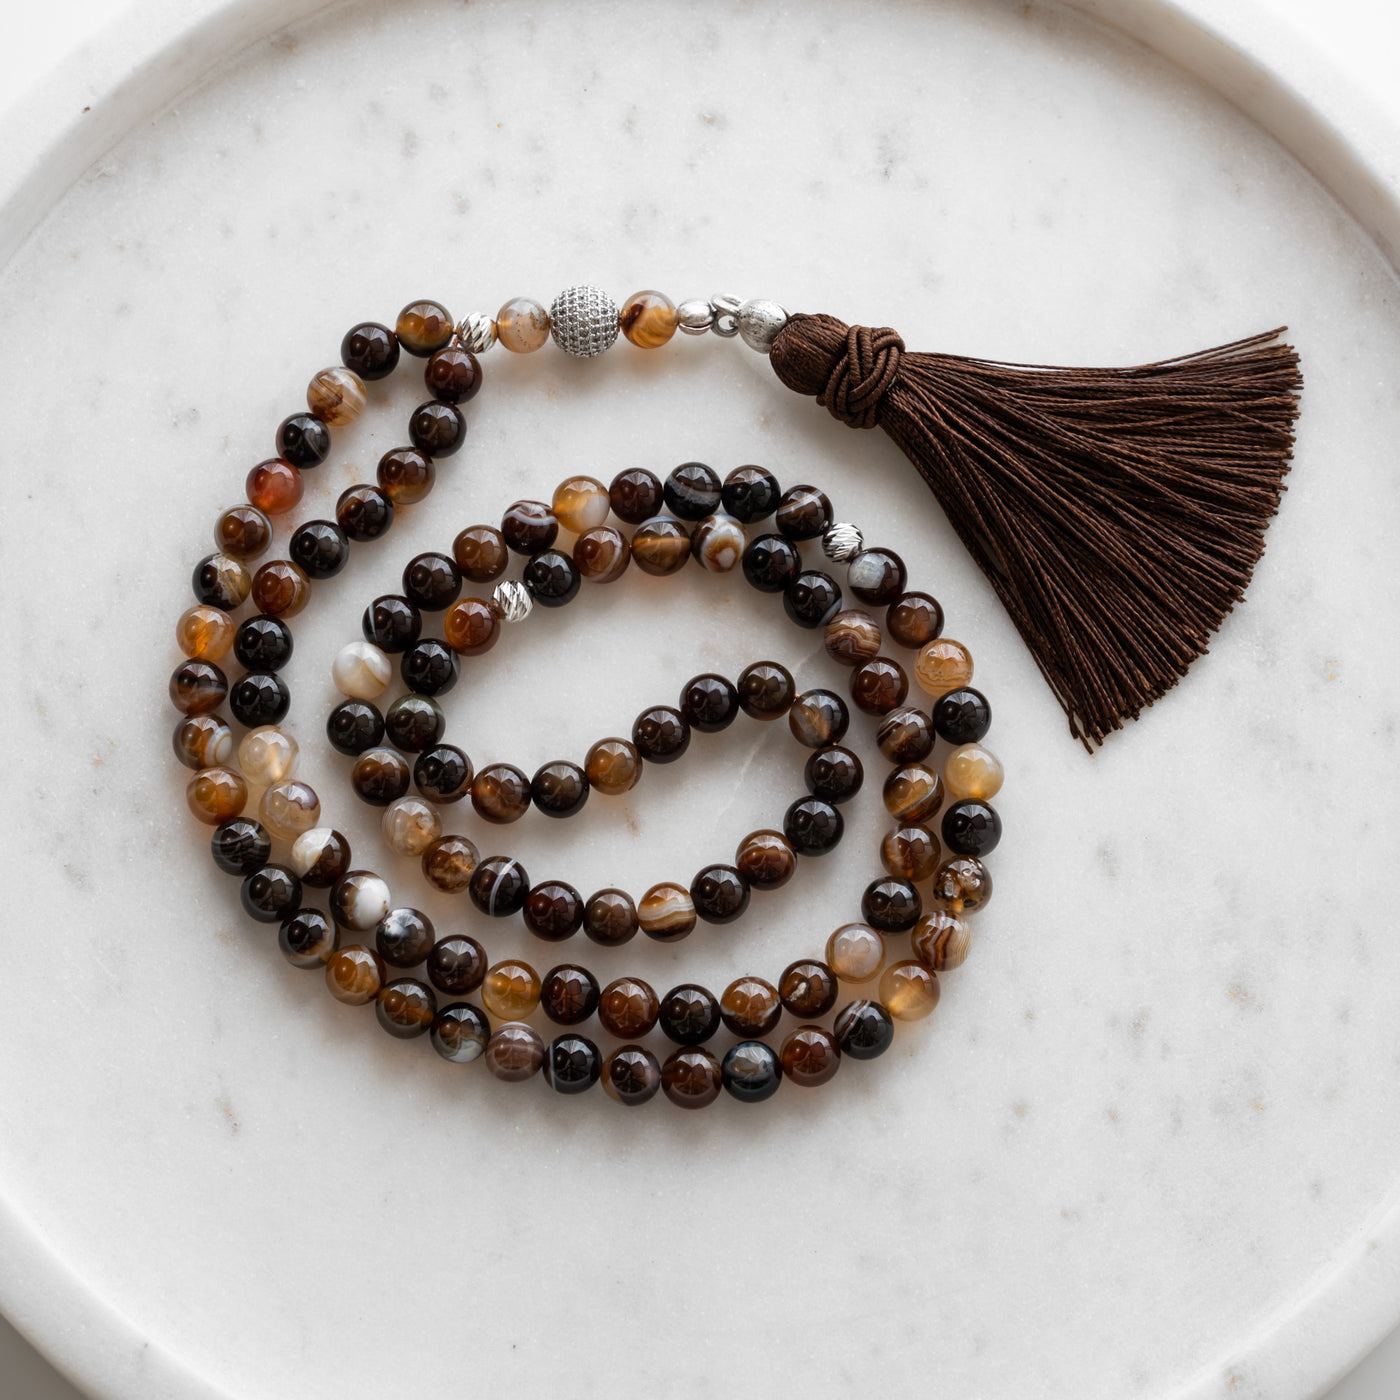 99 Prayer beads - Brown Agate Gemstone. With cubic zirconia and sterling silver separators. The Tasbih are handmade in Turkey with big attention to details and quality.